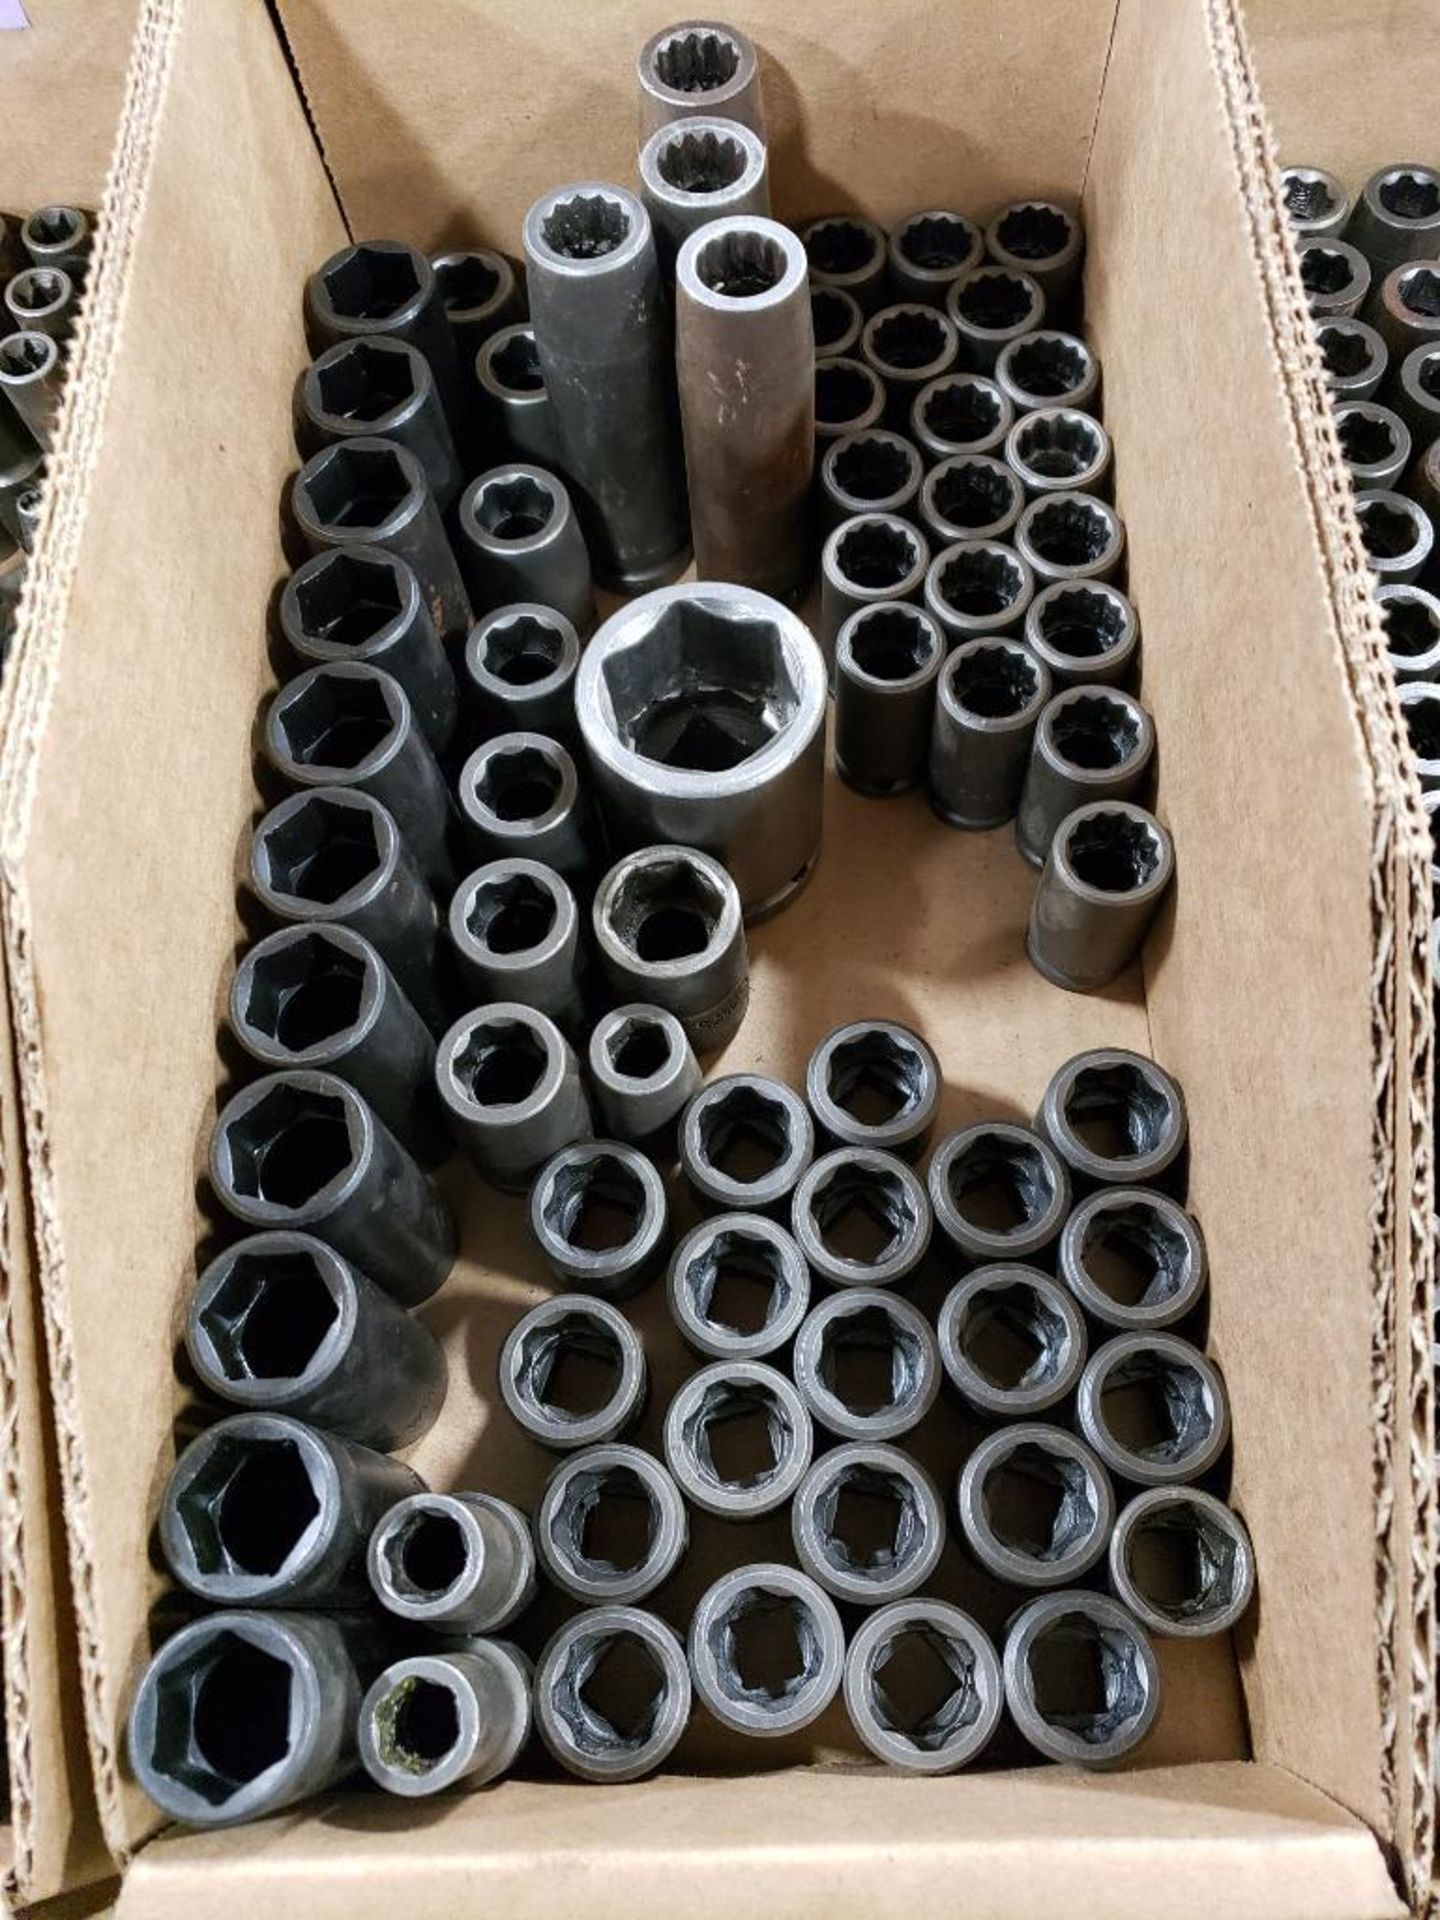 Large Qty of assorted APEX standard socket. 3/8" and 1/2" drive. - Image 2 of 3